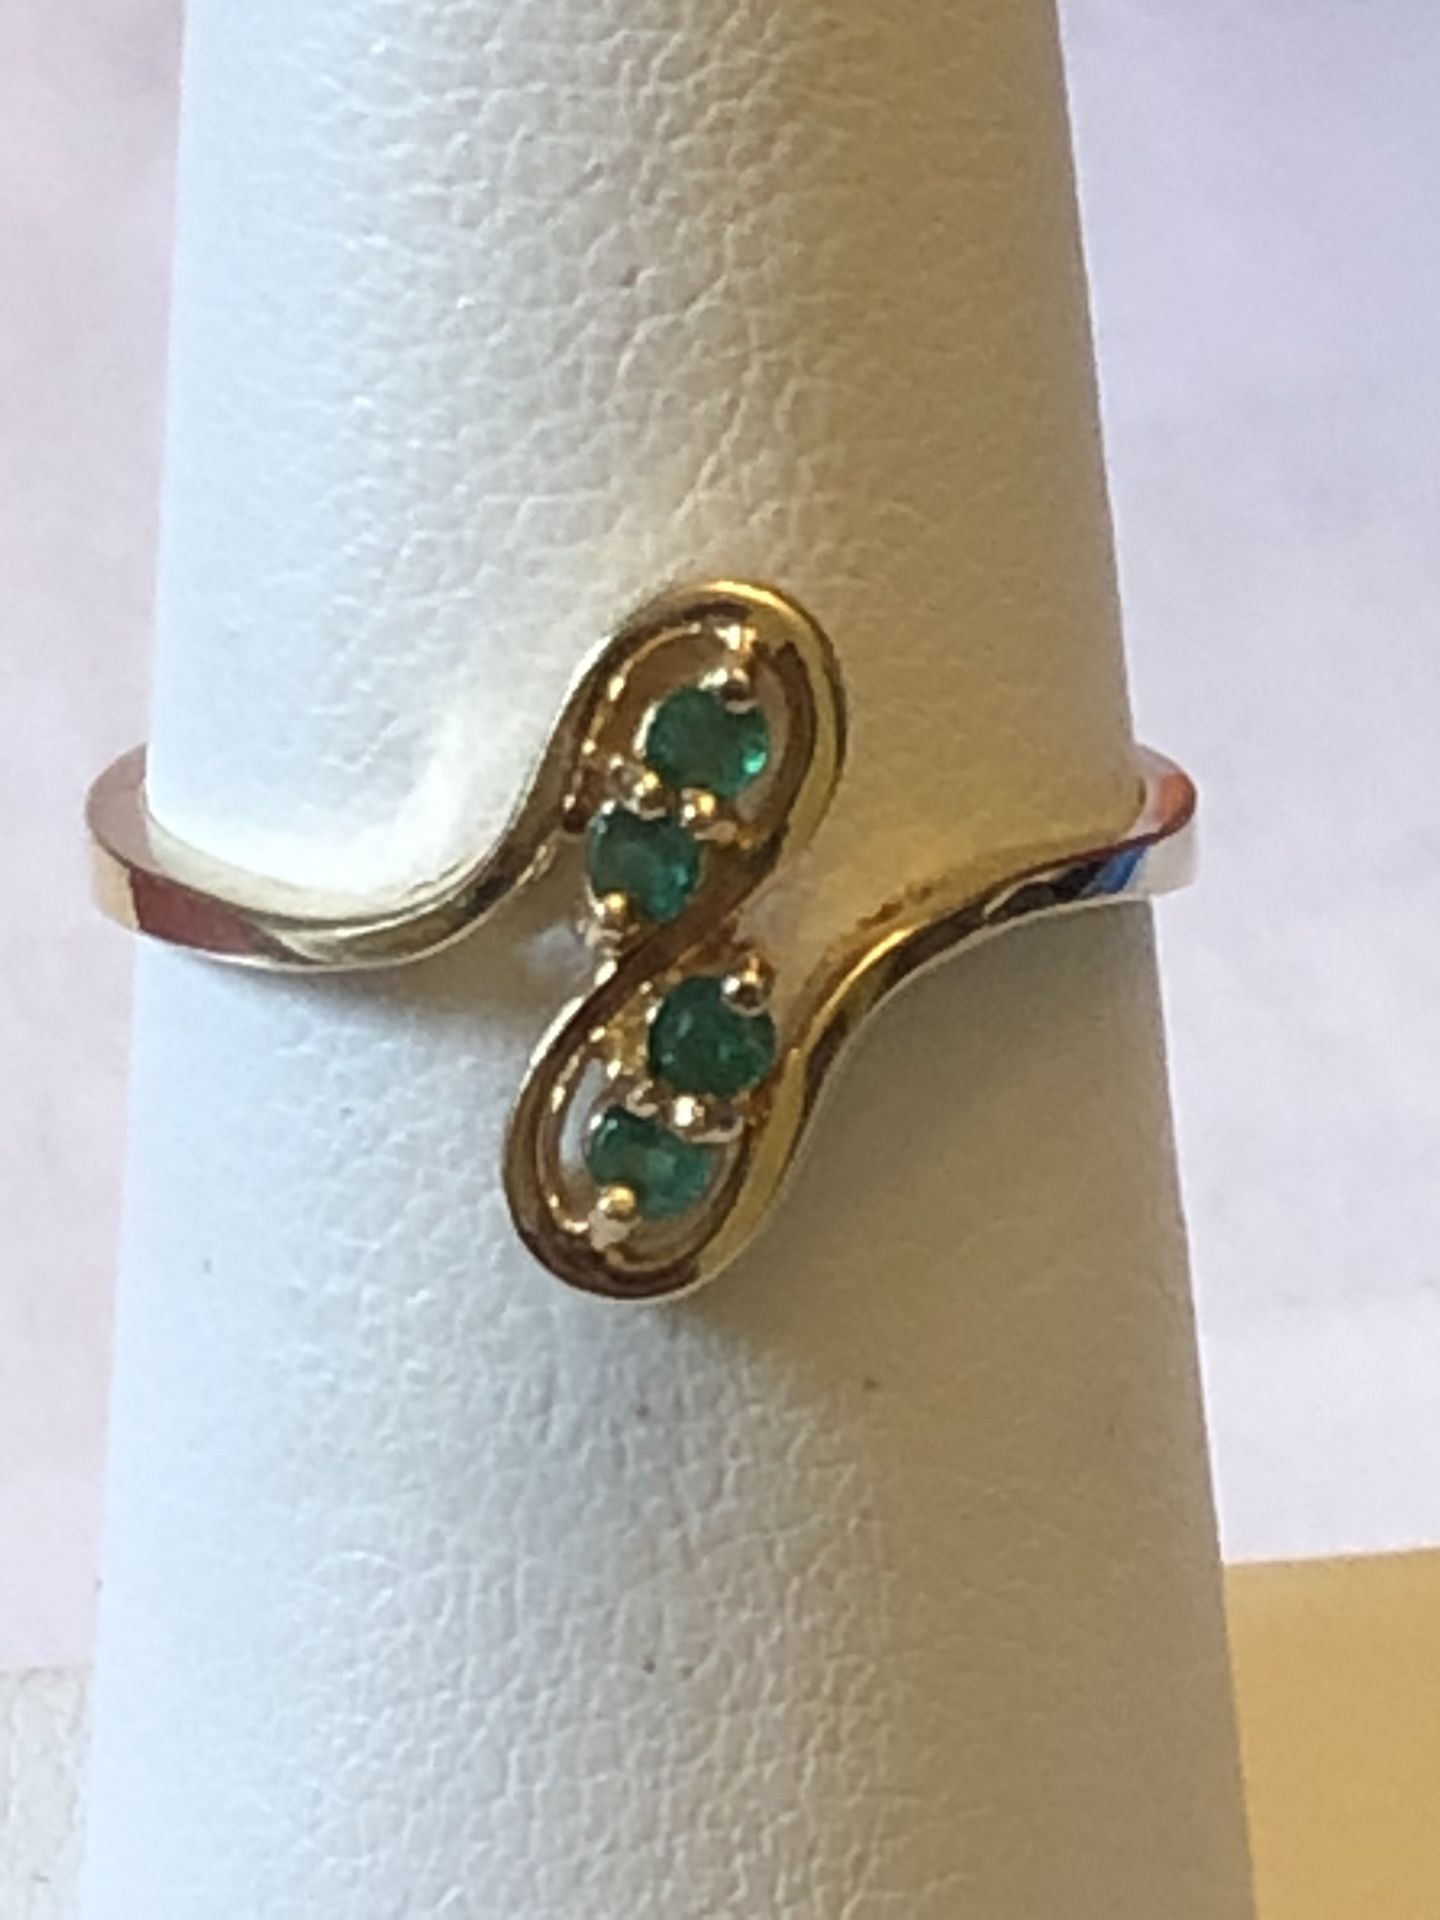 10k yellow gold ring,green stone,2.07 grams, size 6.5, please look at all pictures for more details